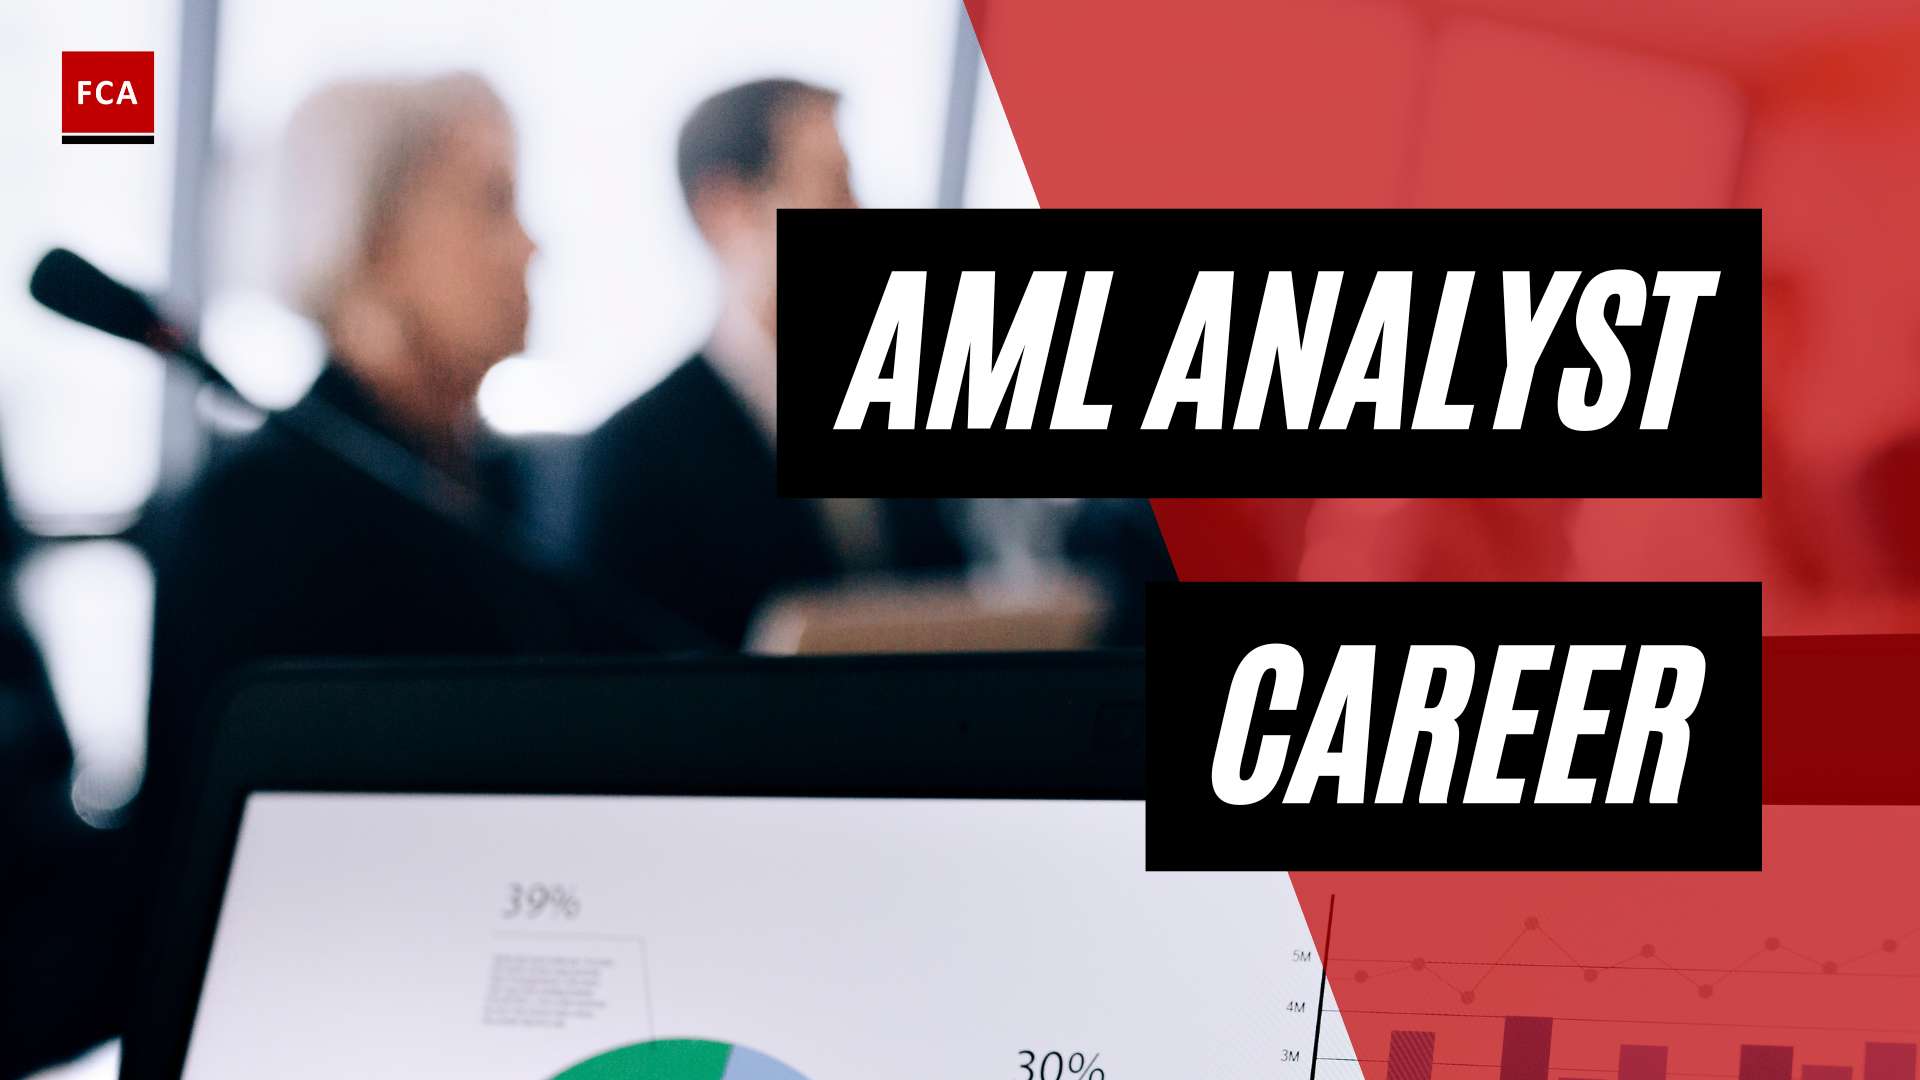 Aml Analyst Career: Empowering The Fight Against Money Laundering